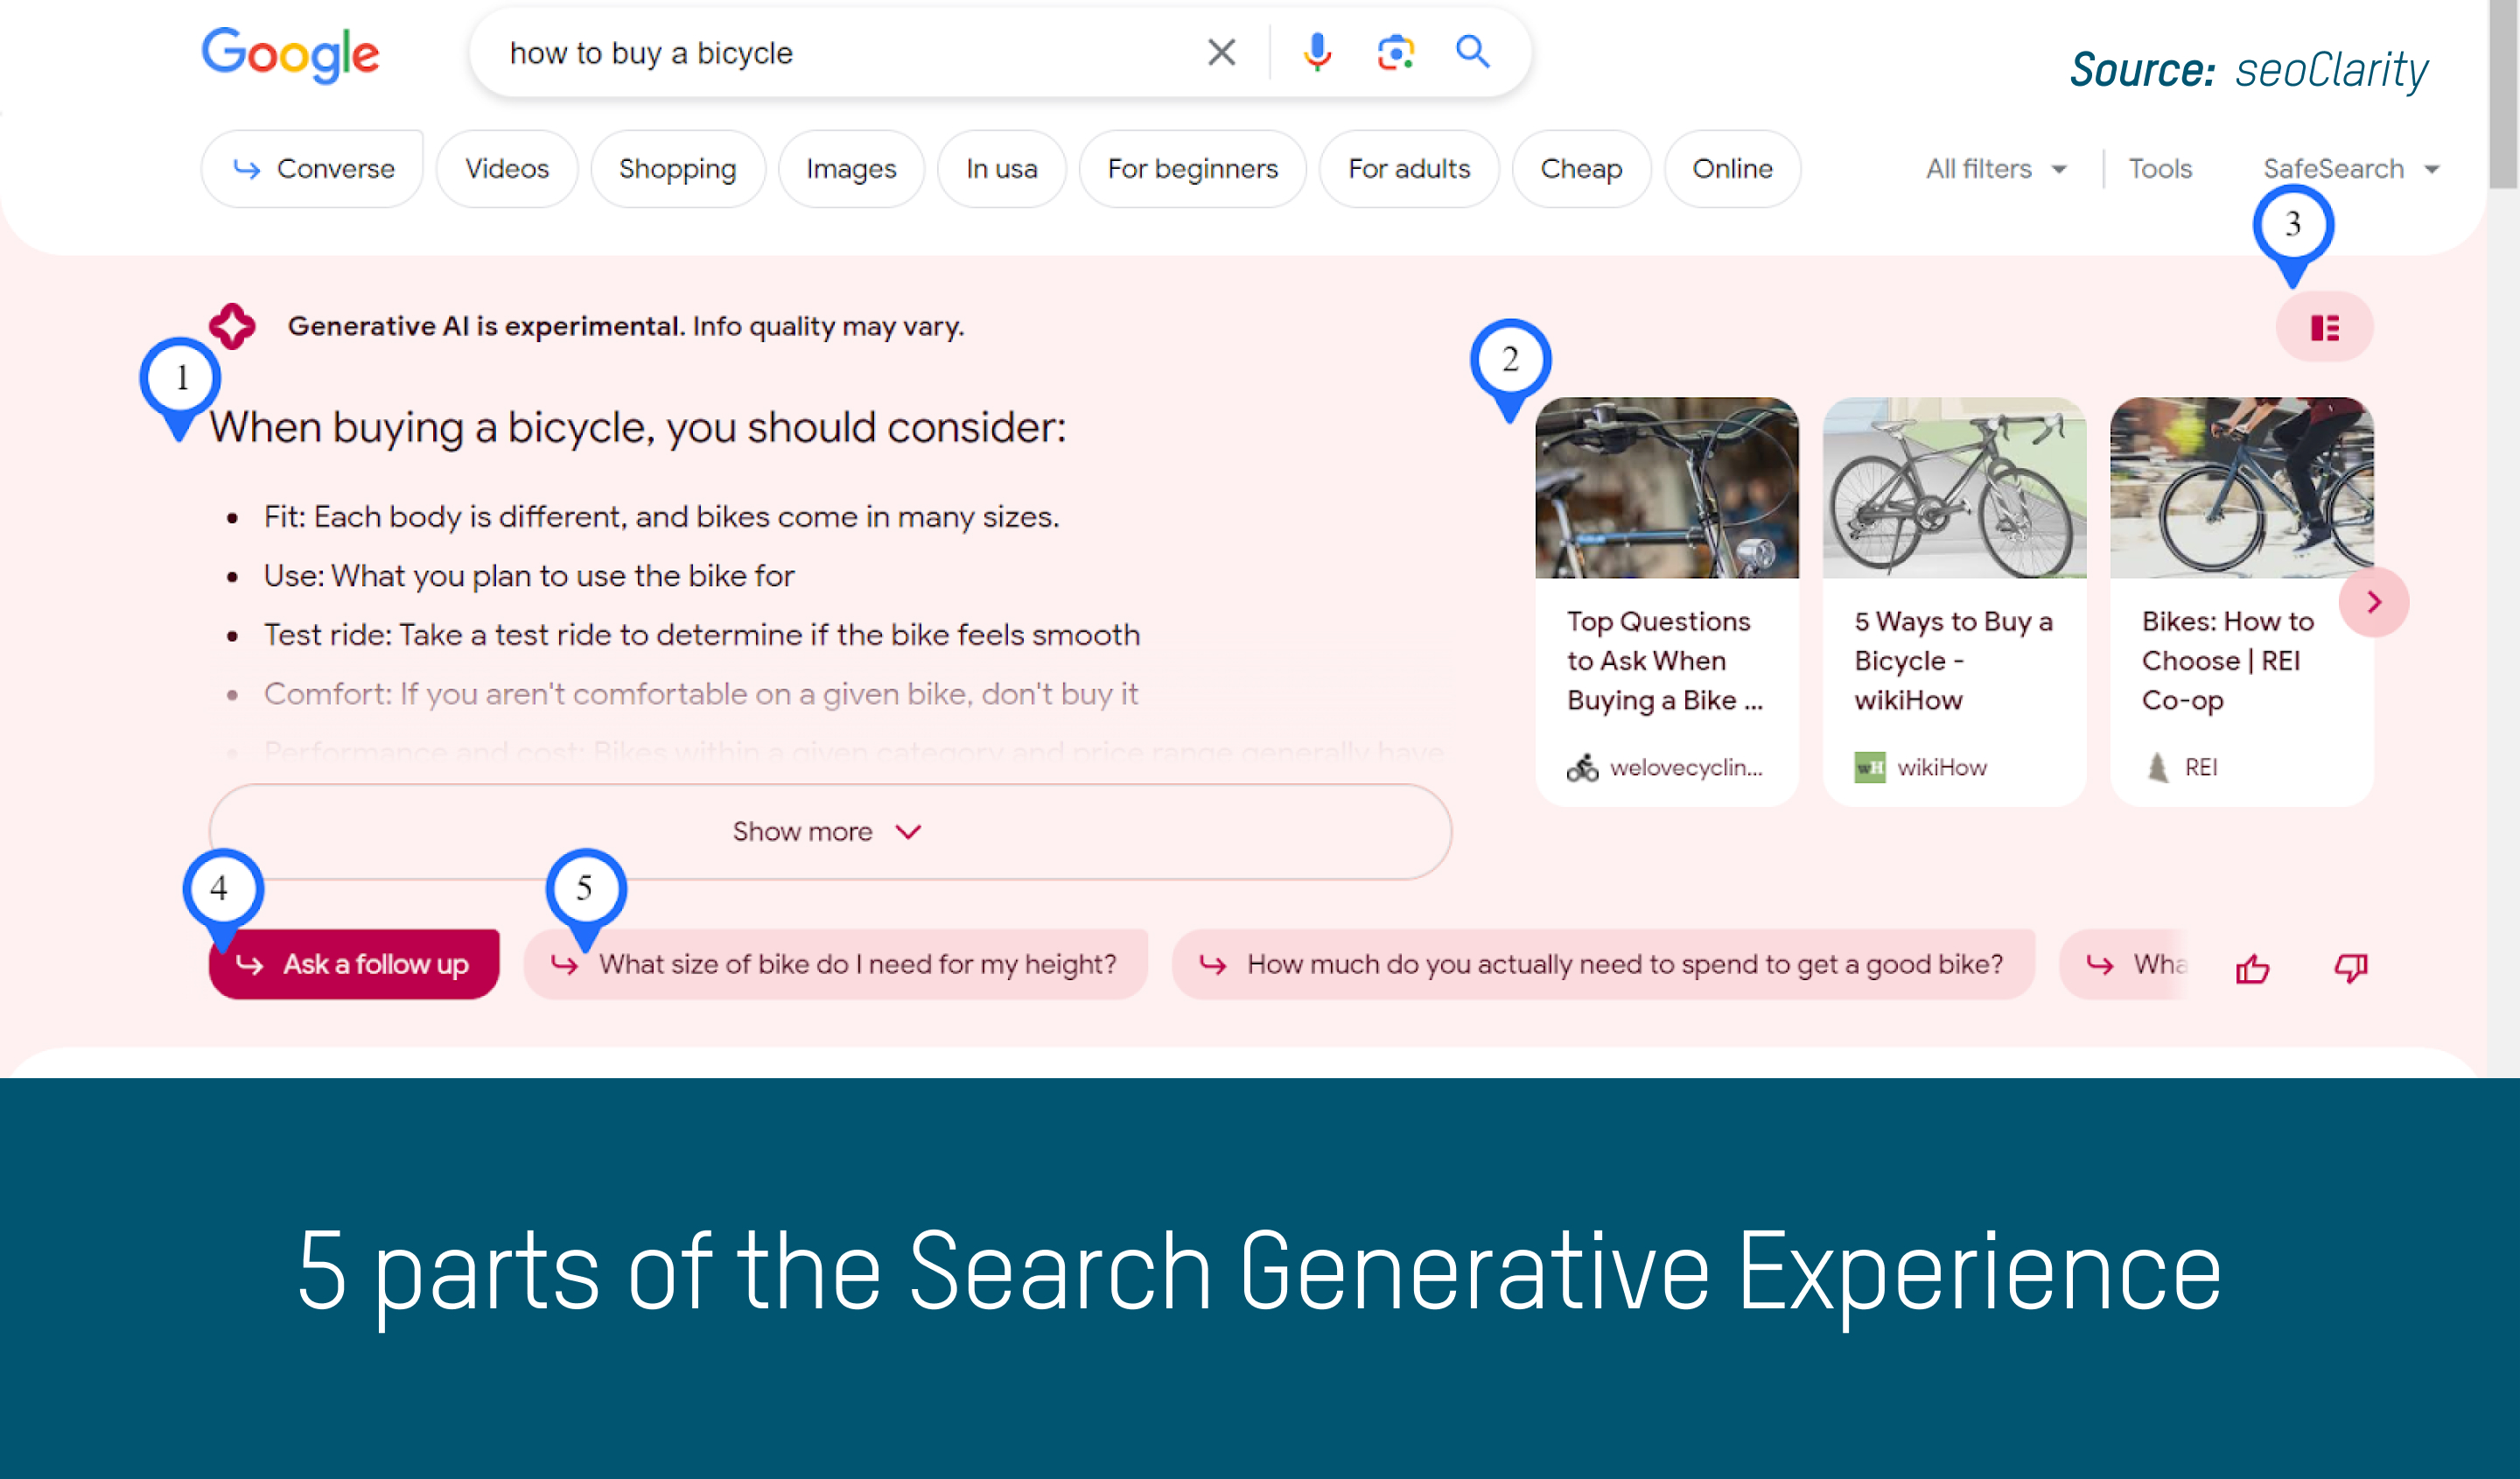 5 parts of the Search Generative Experience